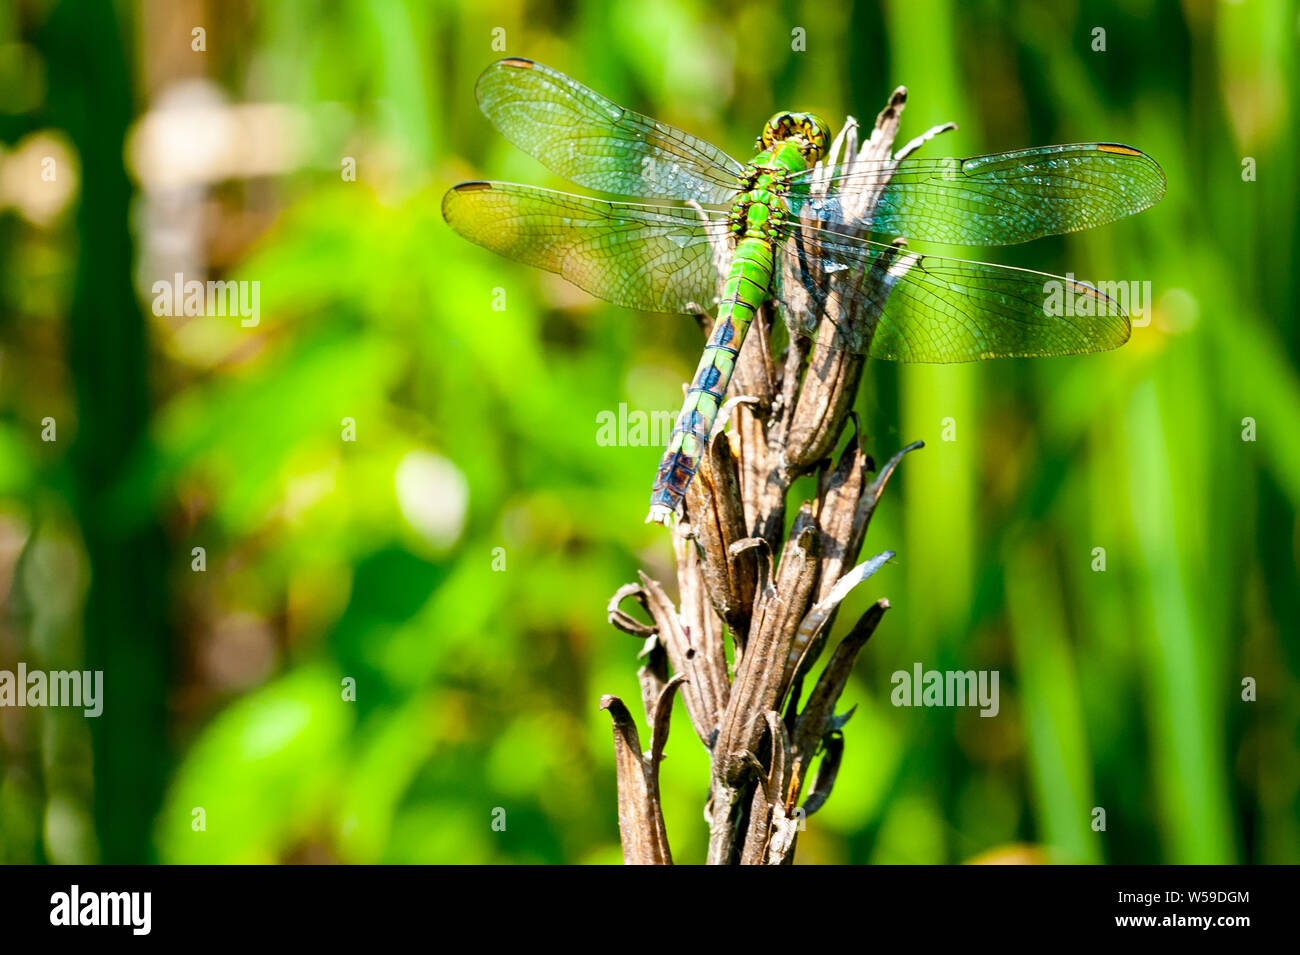 Green Darner dragonfly resting on a plant at Great Meadows National Park in Concord, Massachusetts. Stock Photo